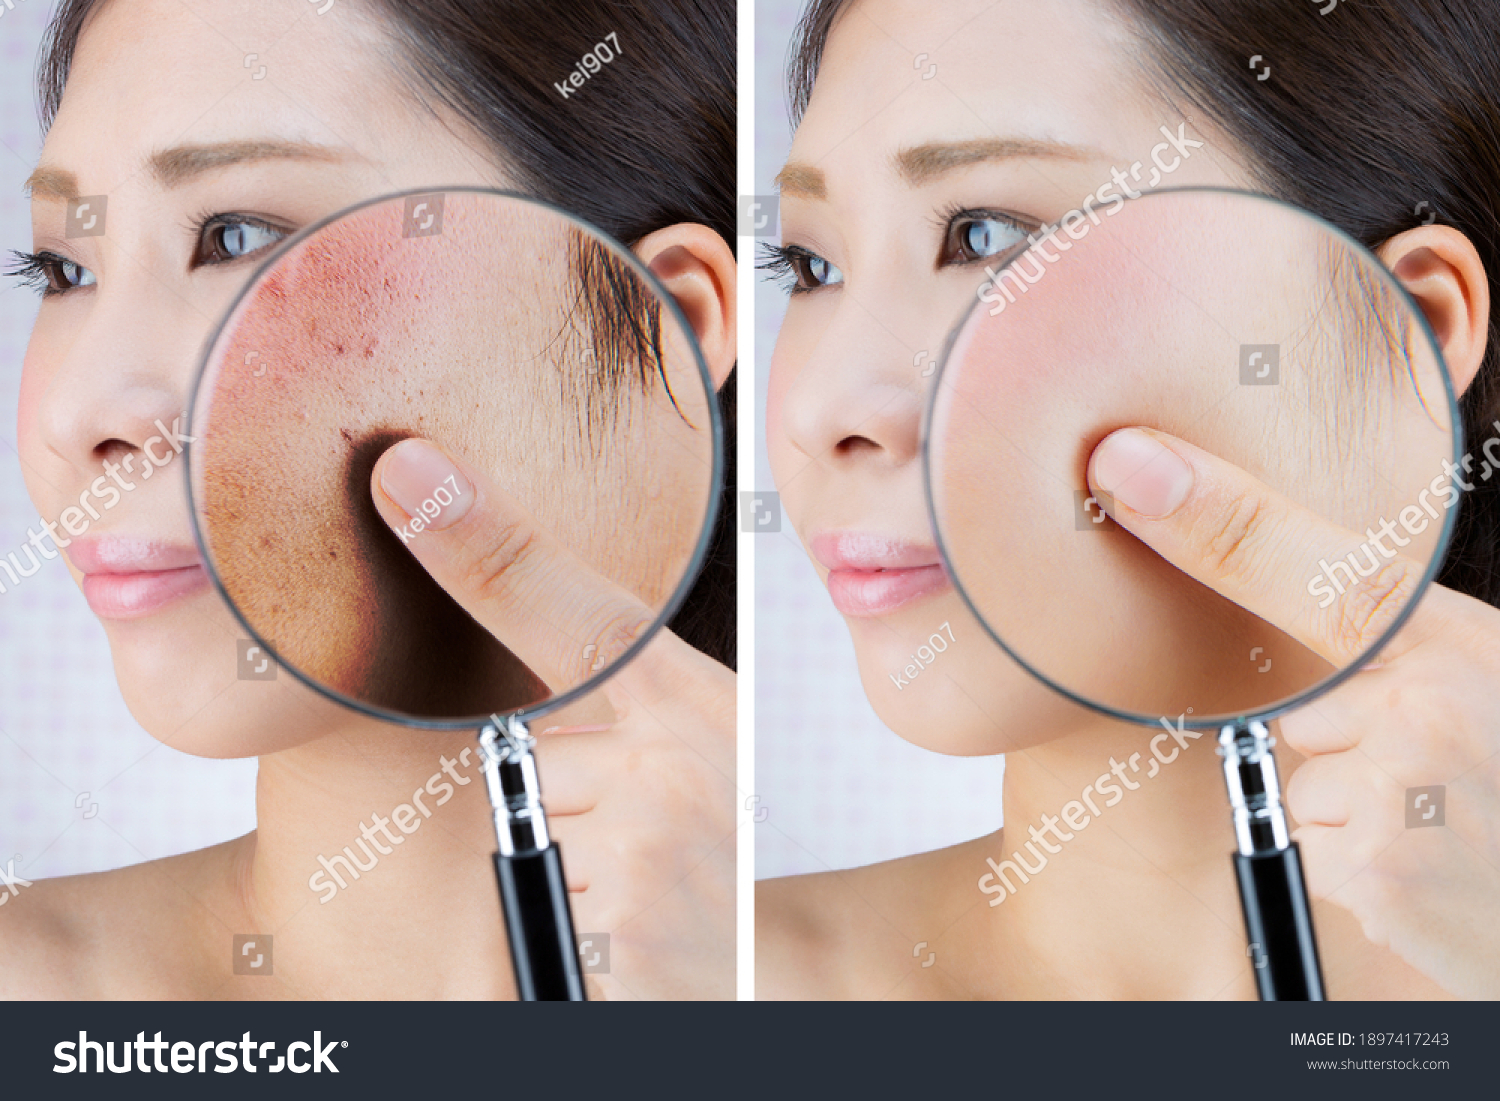 The texture of the skin of young women is magnified and compared with a magnifying glass. #1897417243